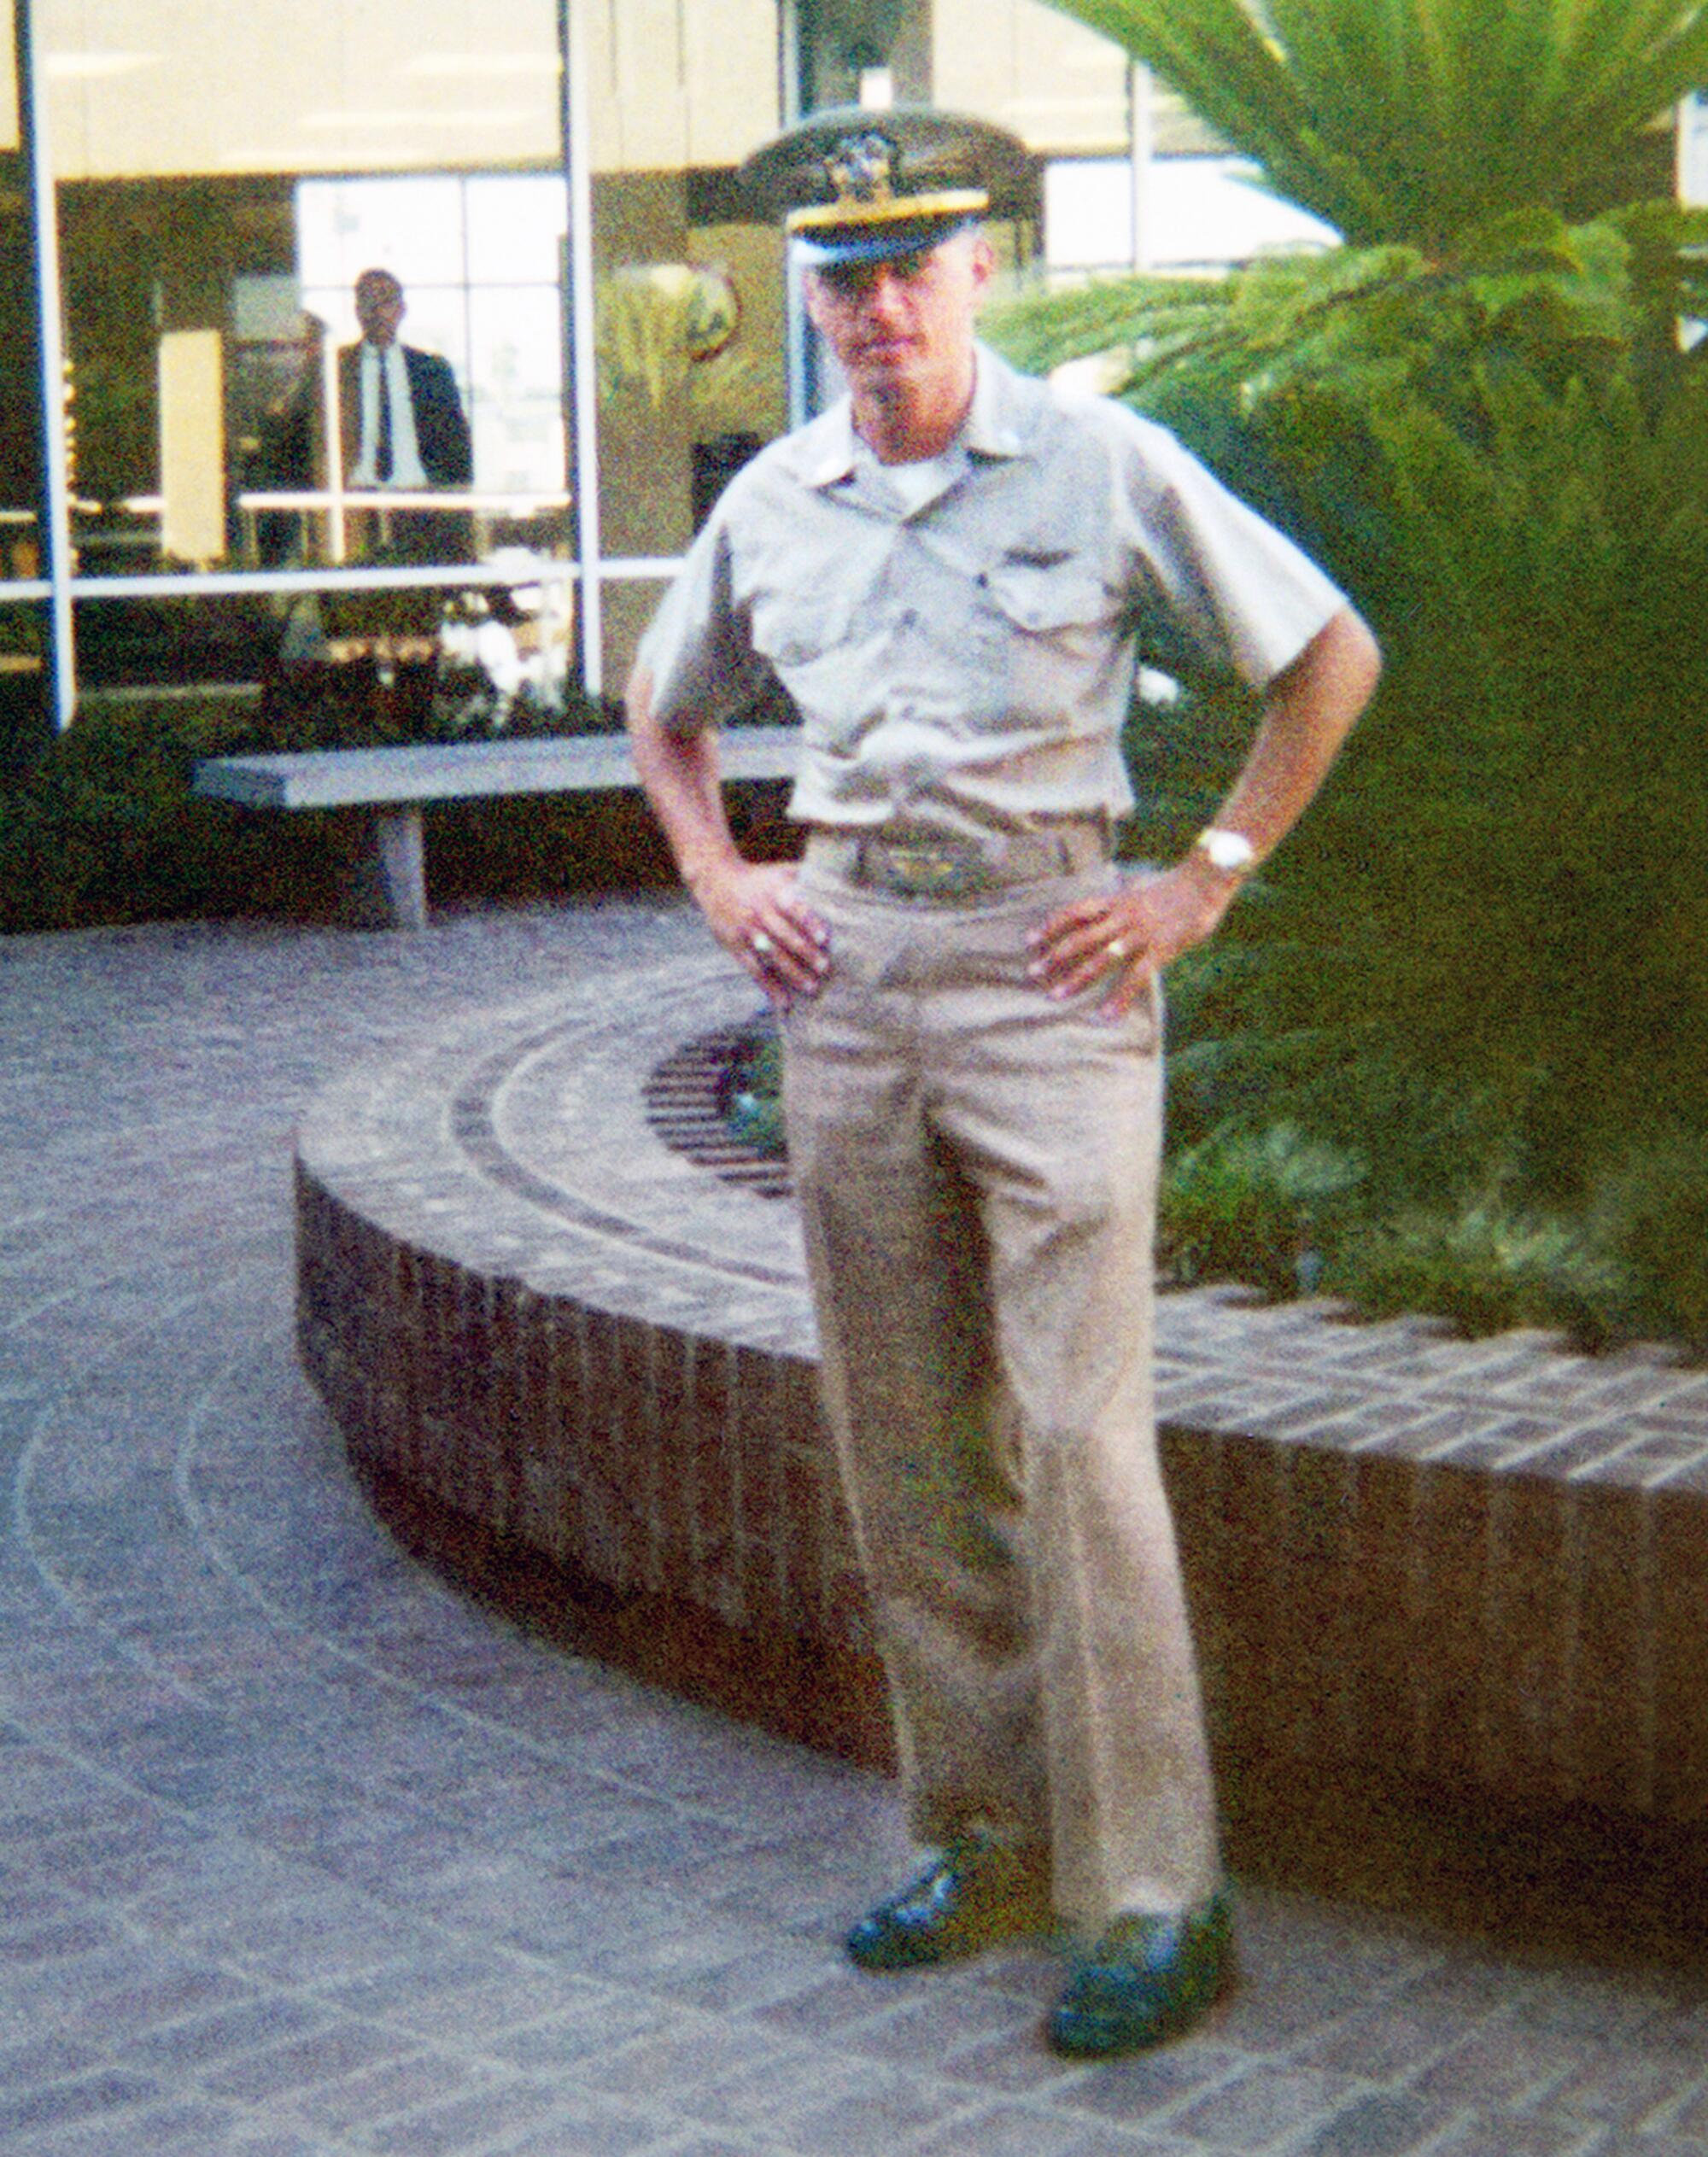 Gus Herrmann in a military outfit in an undated photo